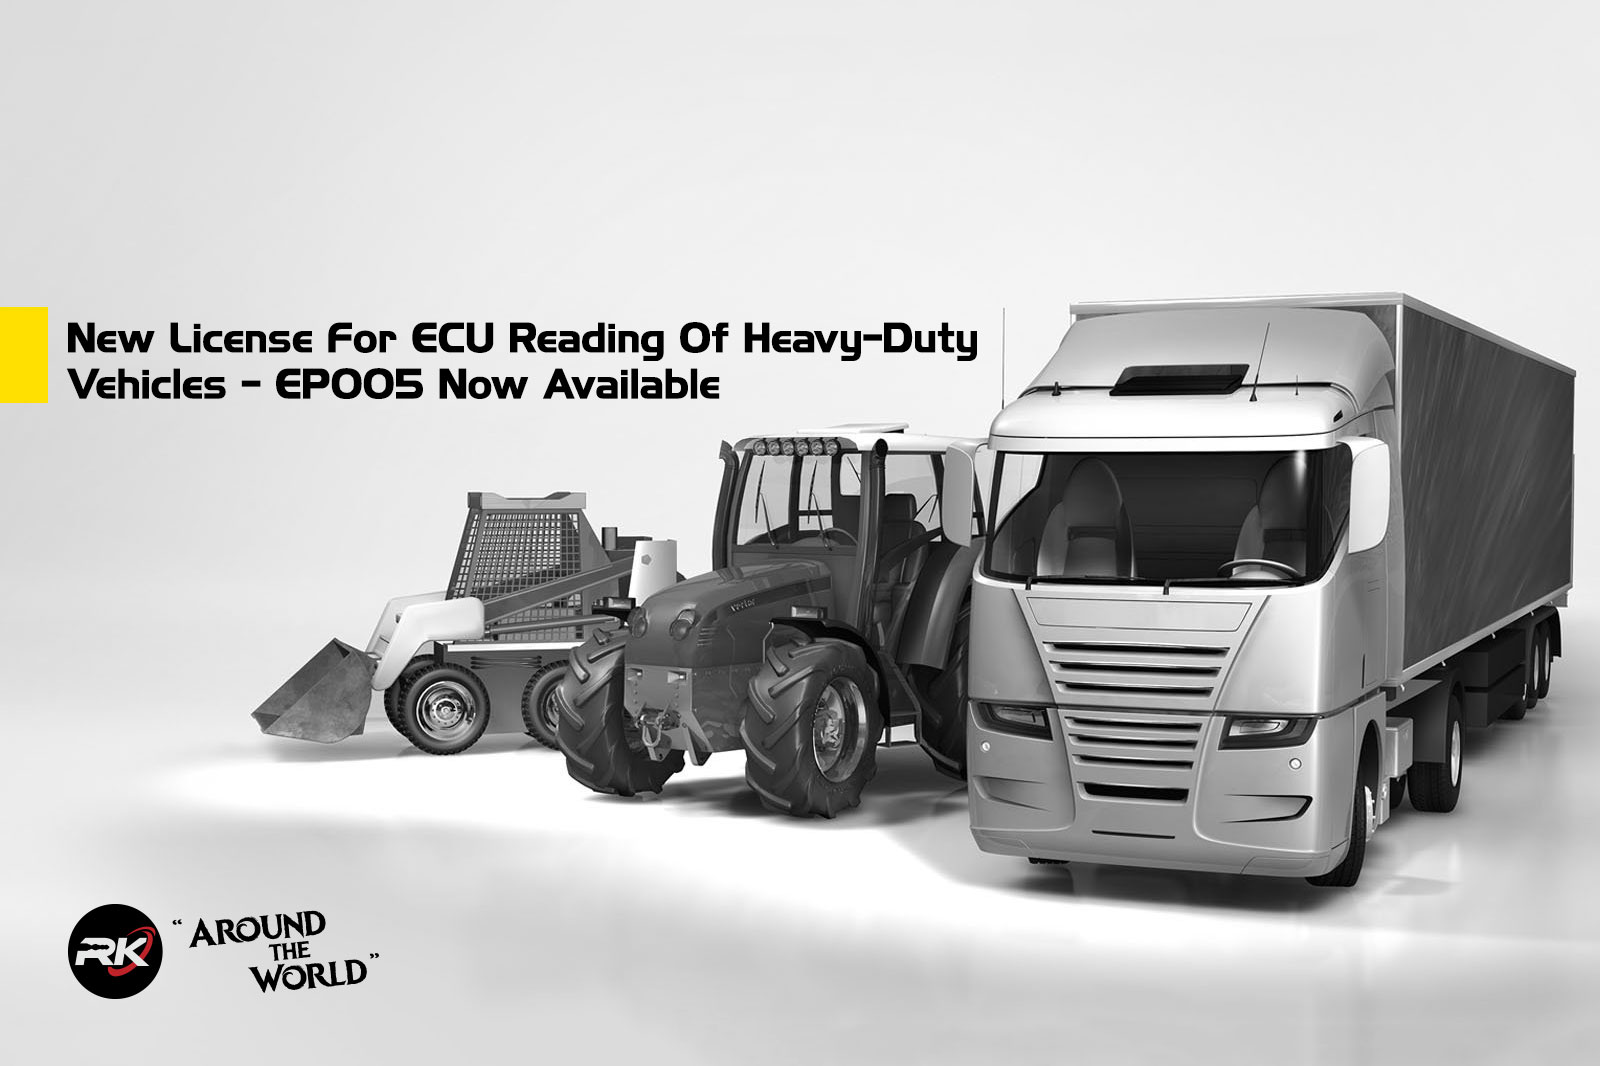 New License For ECU Reading Of Heavy-Duty Vehicles - EP005 Now Available